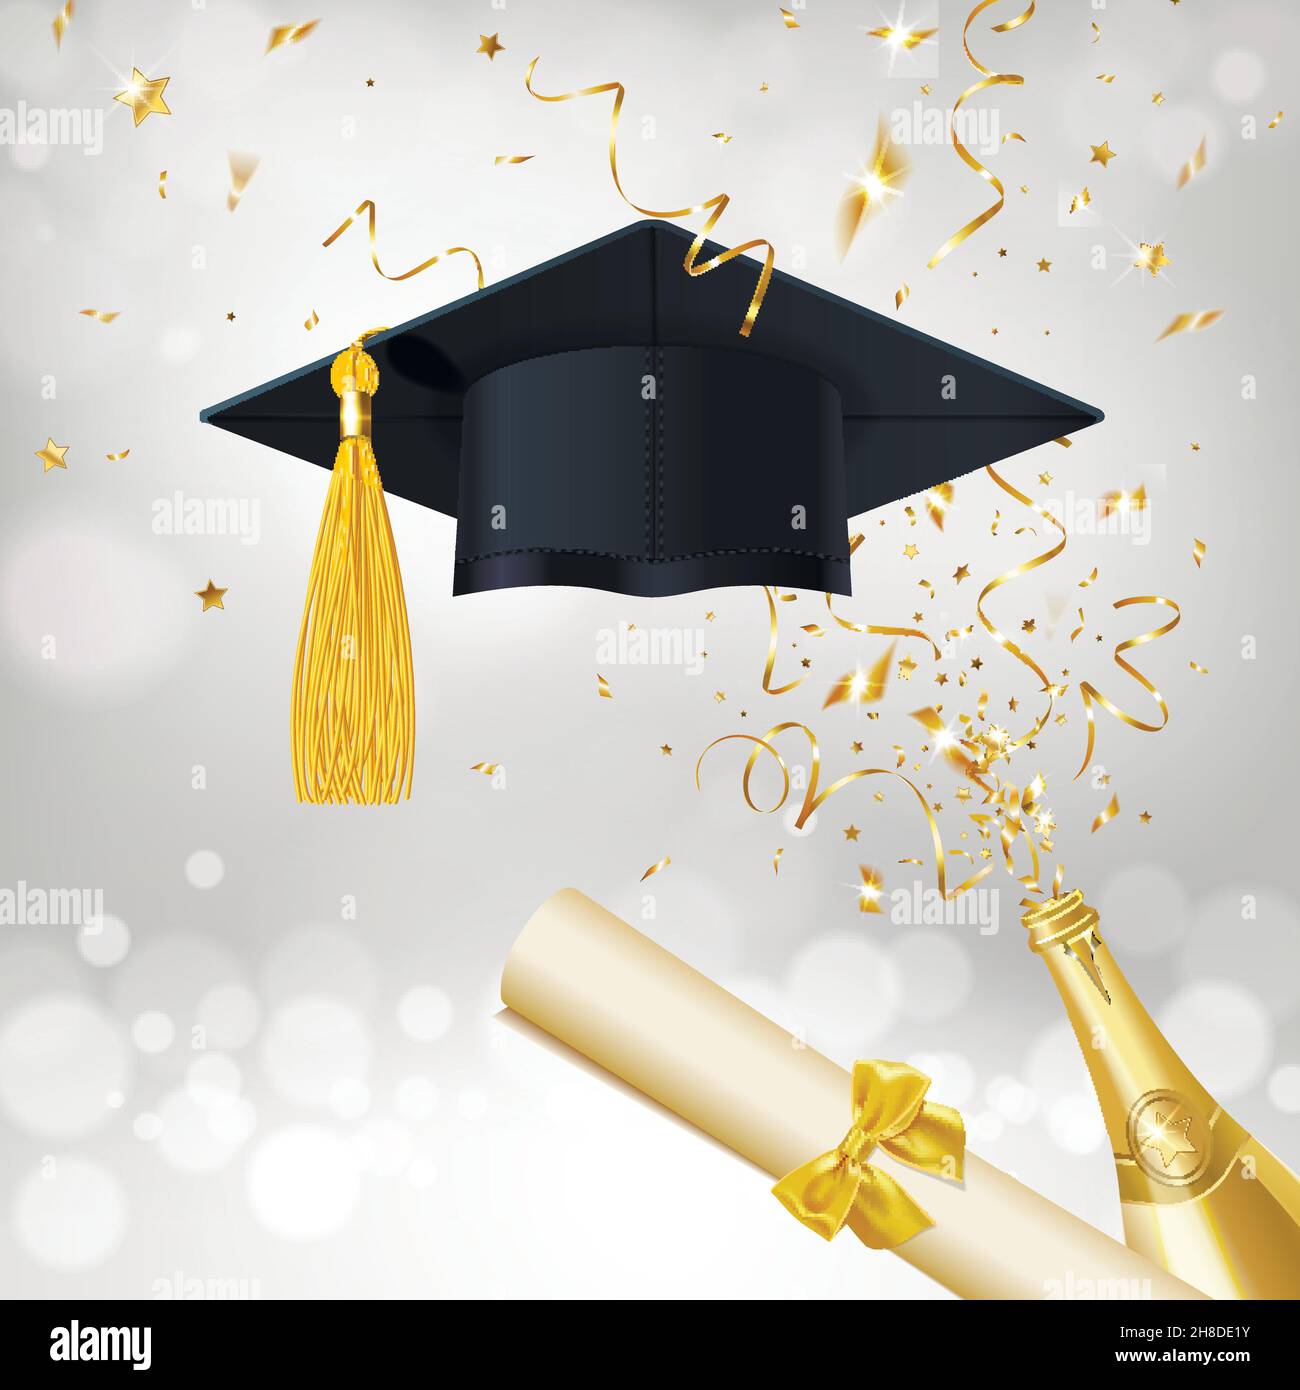 congratulatory banner about getting an education with a bottle of champagne and gold confetti on a silver background Stock Vector